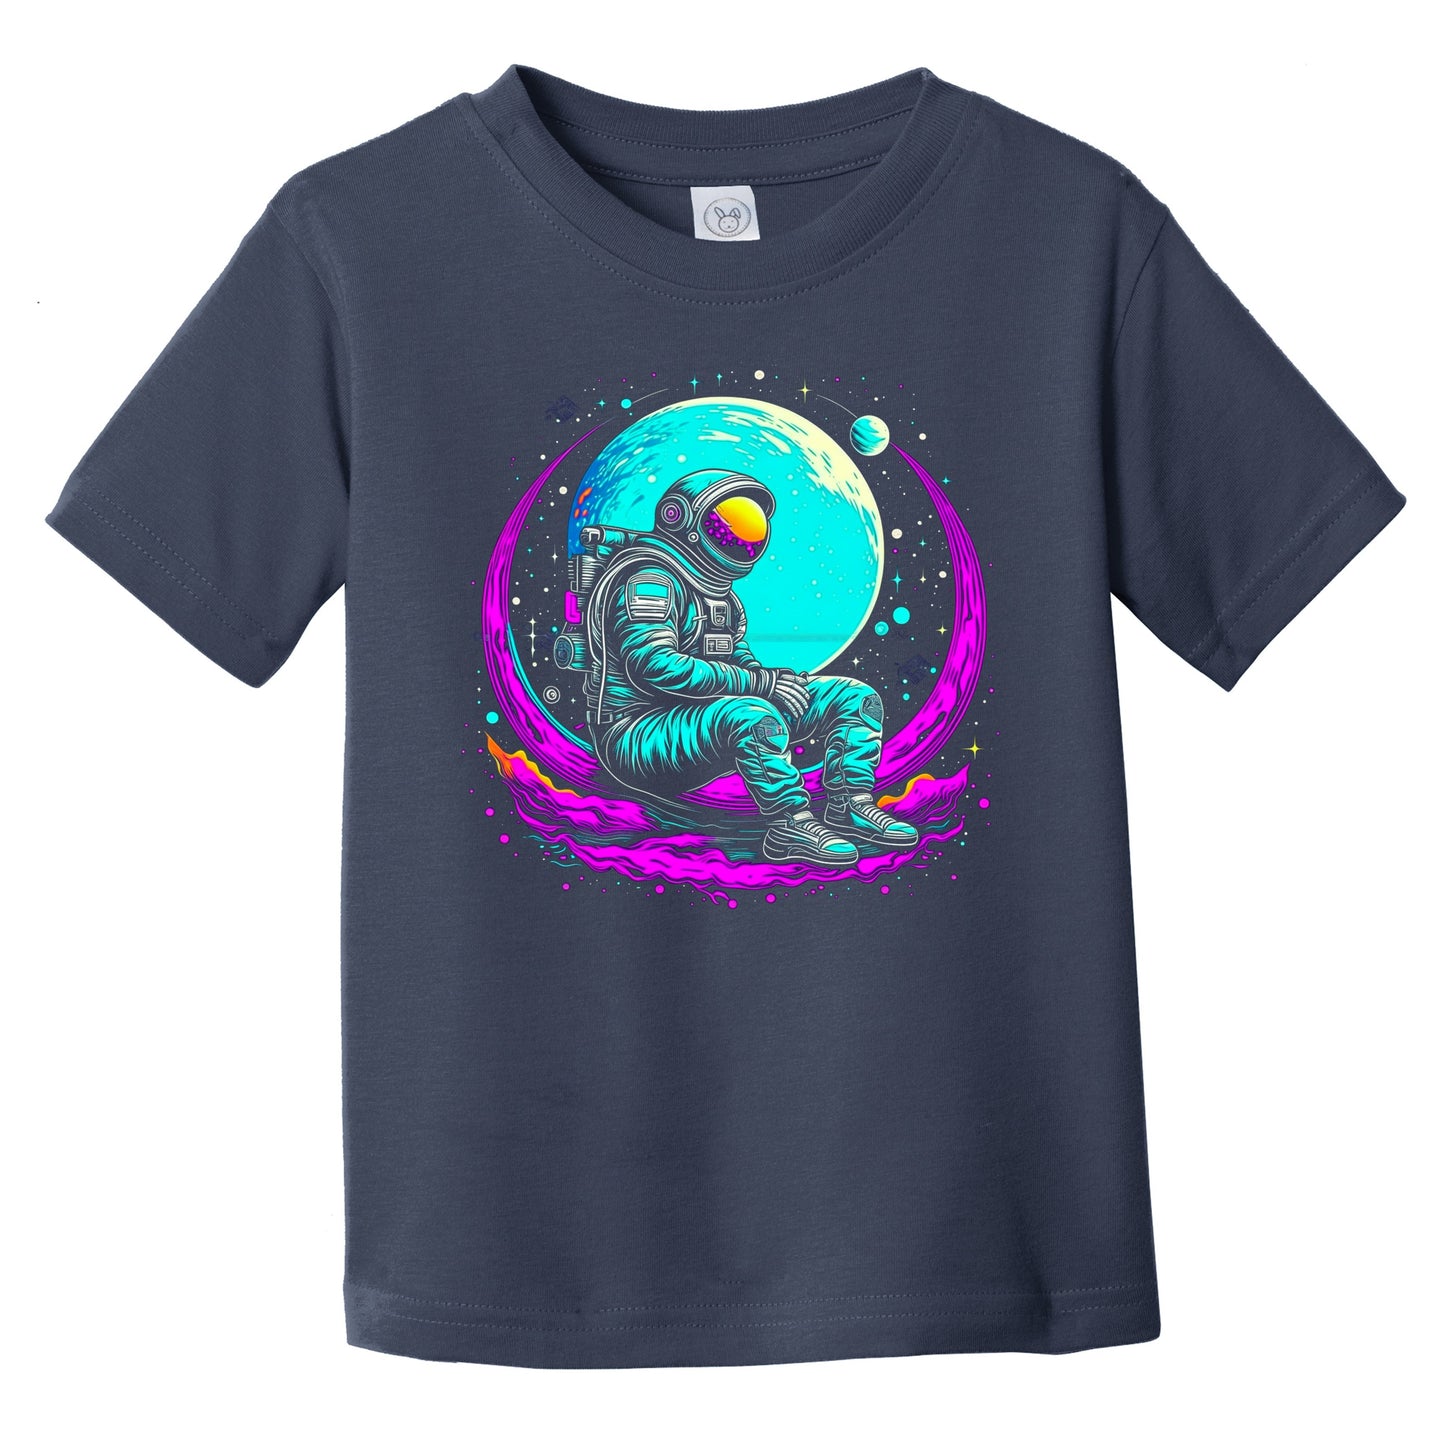 Colorful Bright Astronaut Vibrant Psychedelic Spaceman Art Infant Toddler T-Shirt